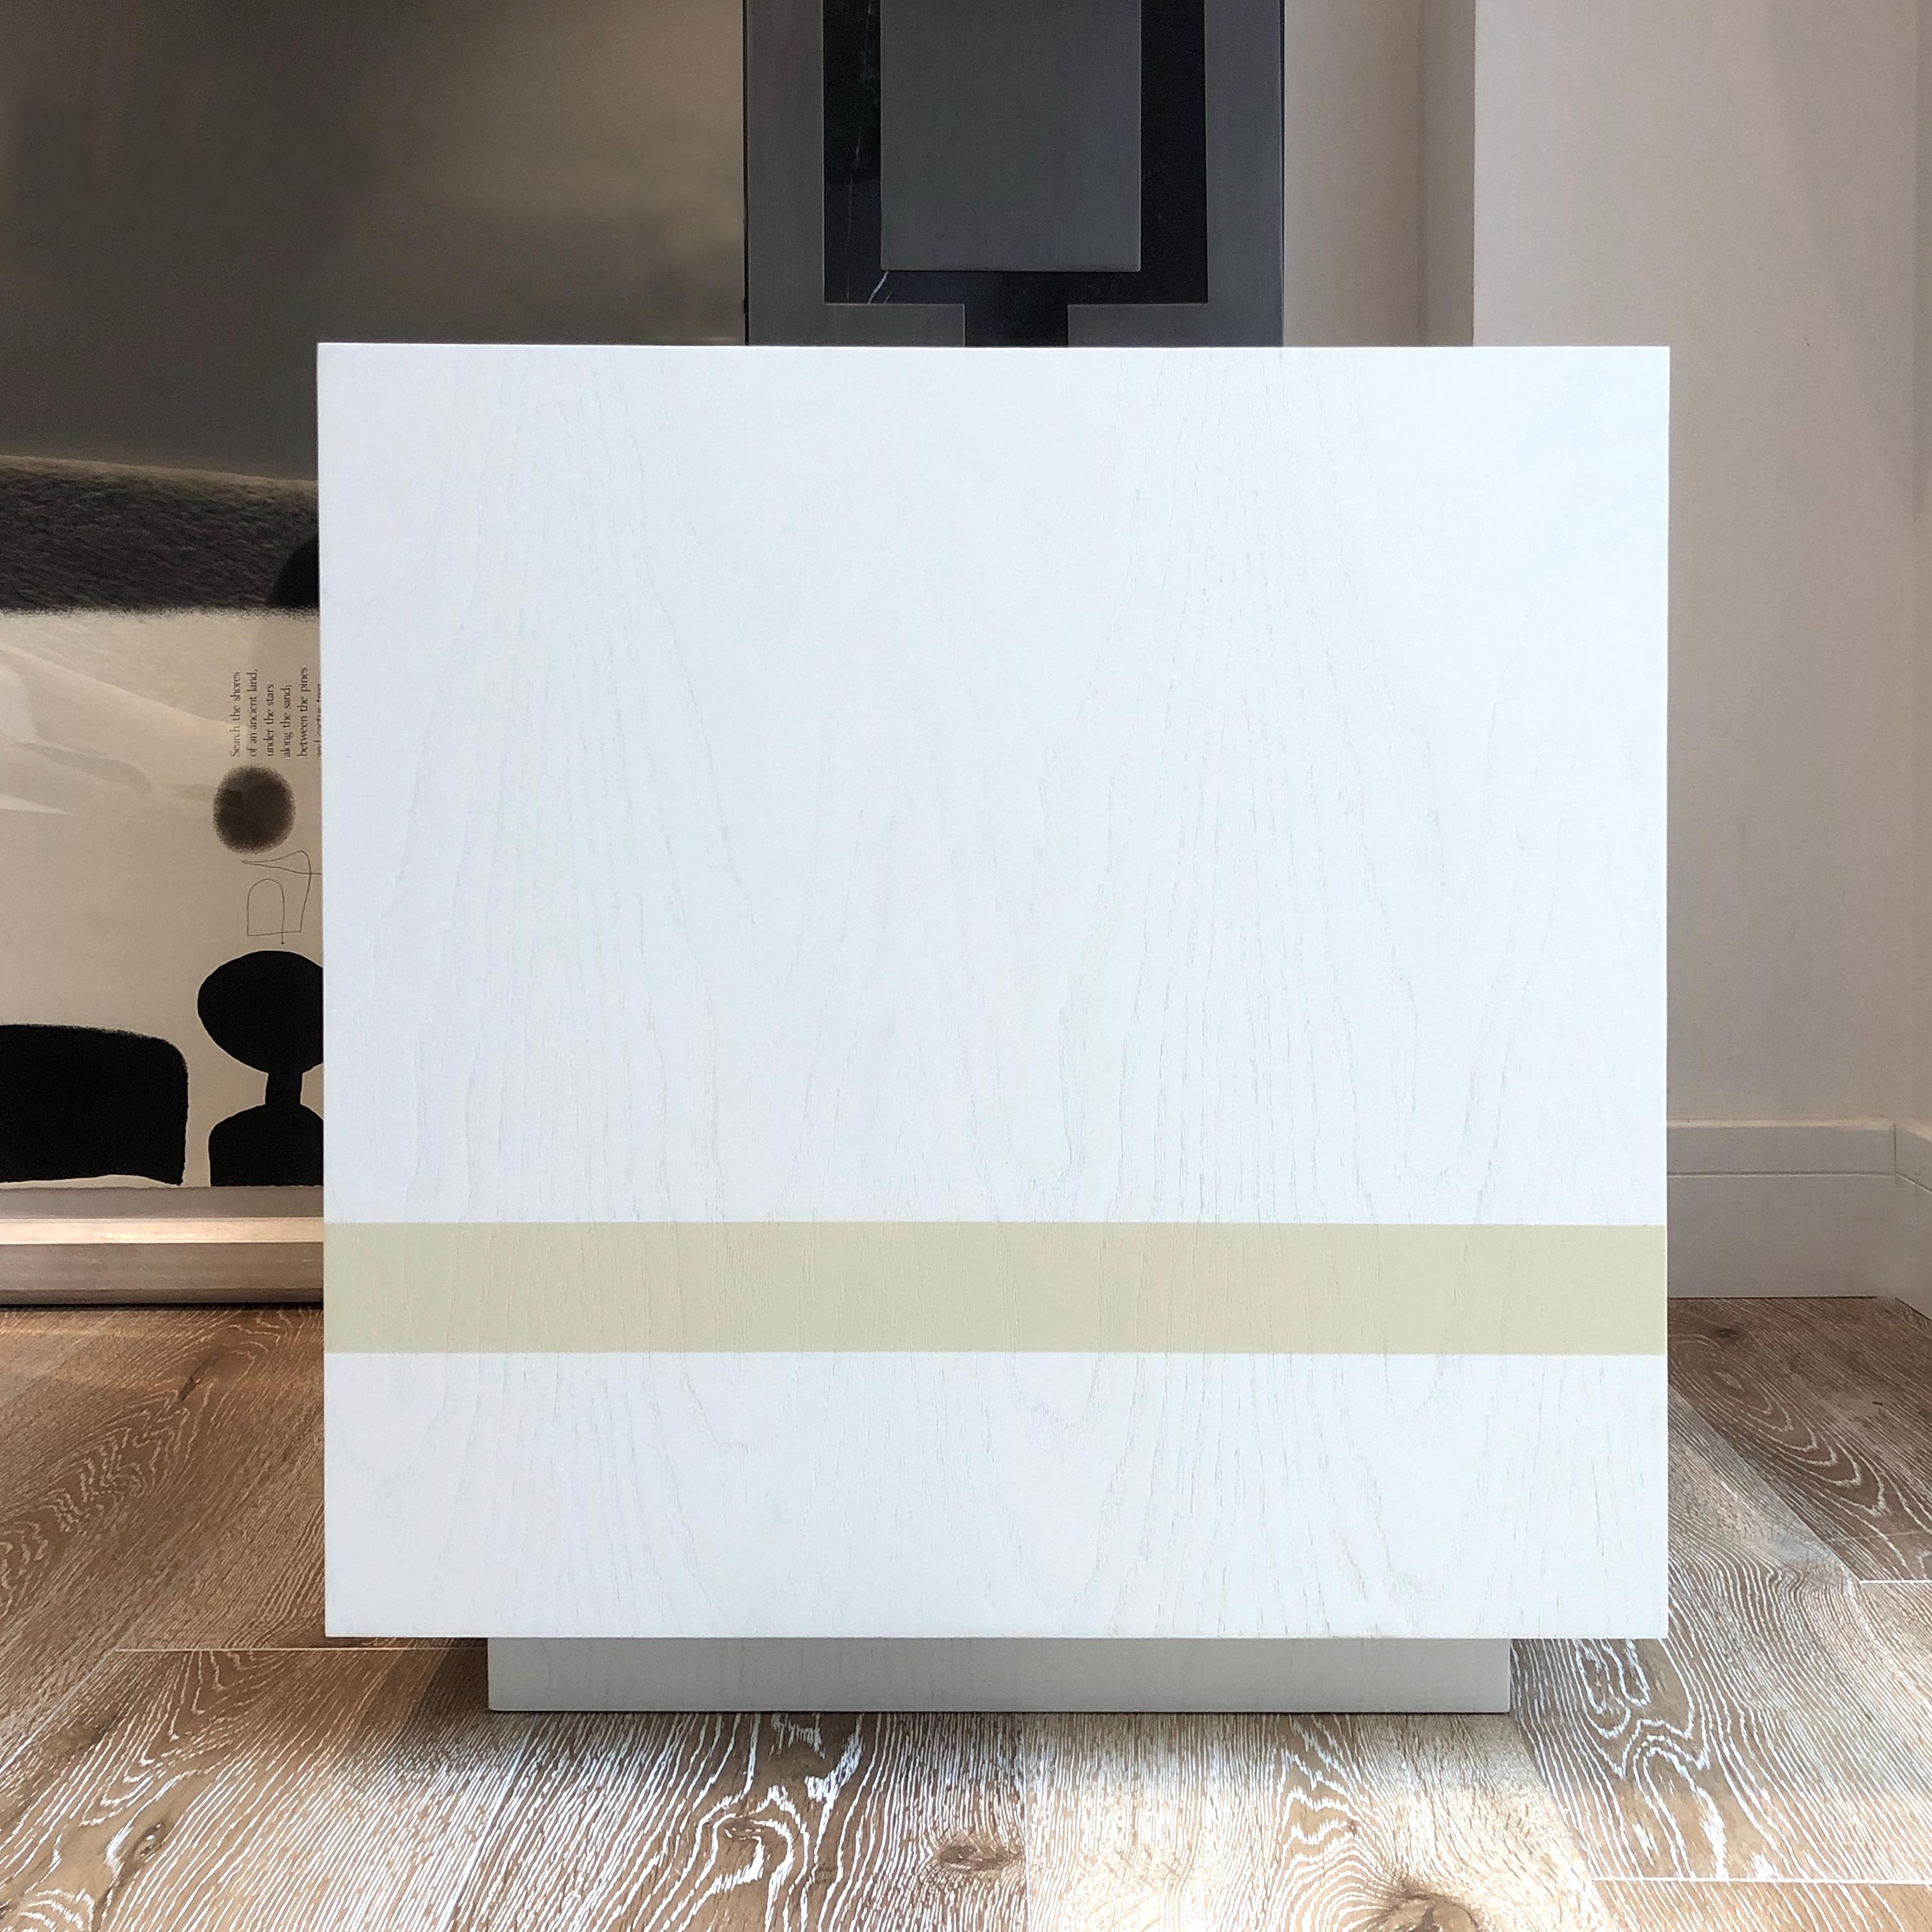 Pearl white (RAL 1013) satin lacquer ash cube side table with ivory (RAL 1014) trim. Bespoke dimensions and finishes available on request.

Measures: W 50 x D 50 x H 55 cm.